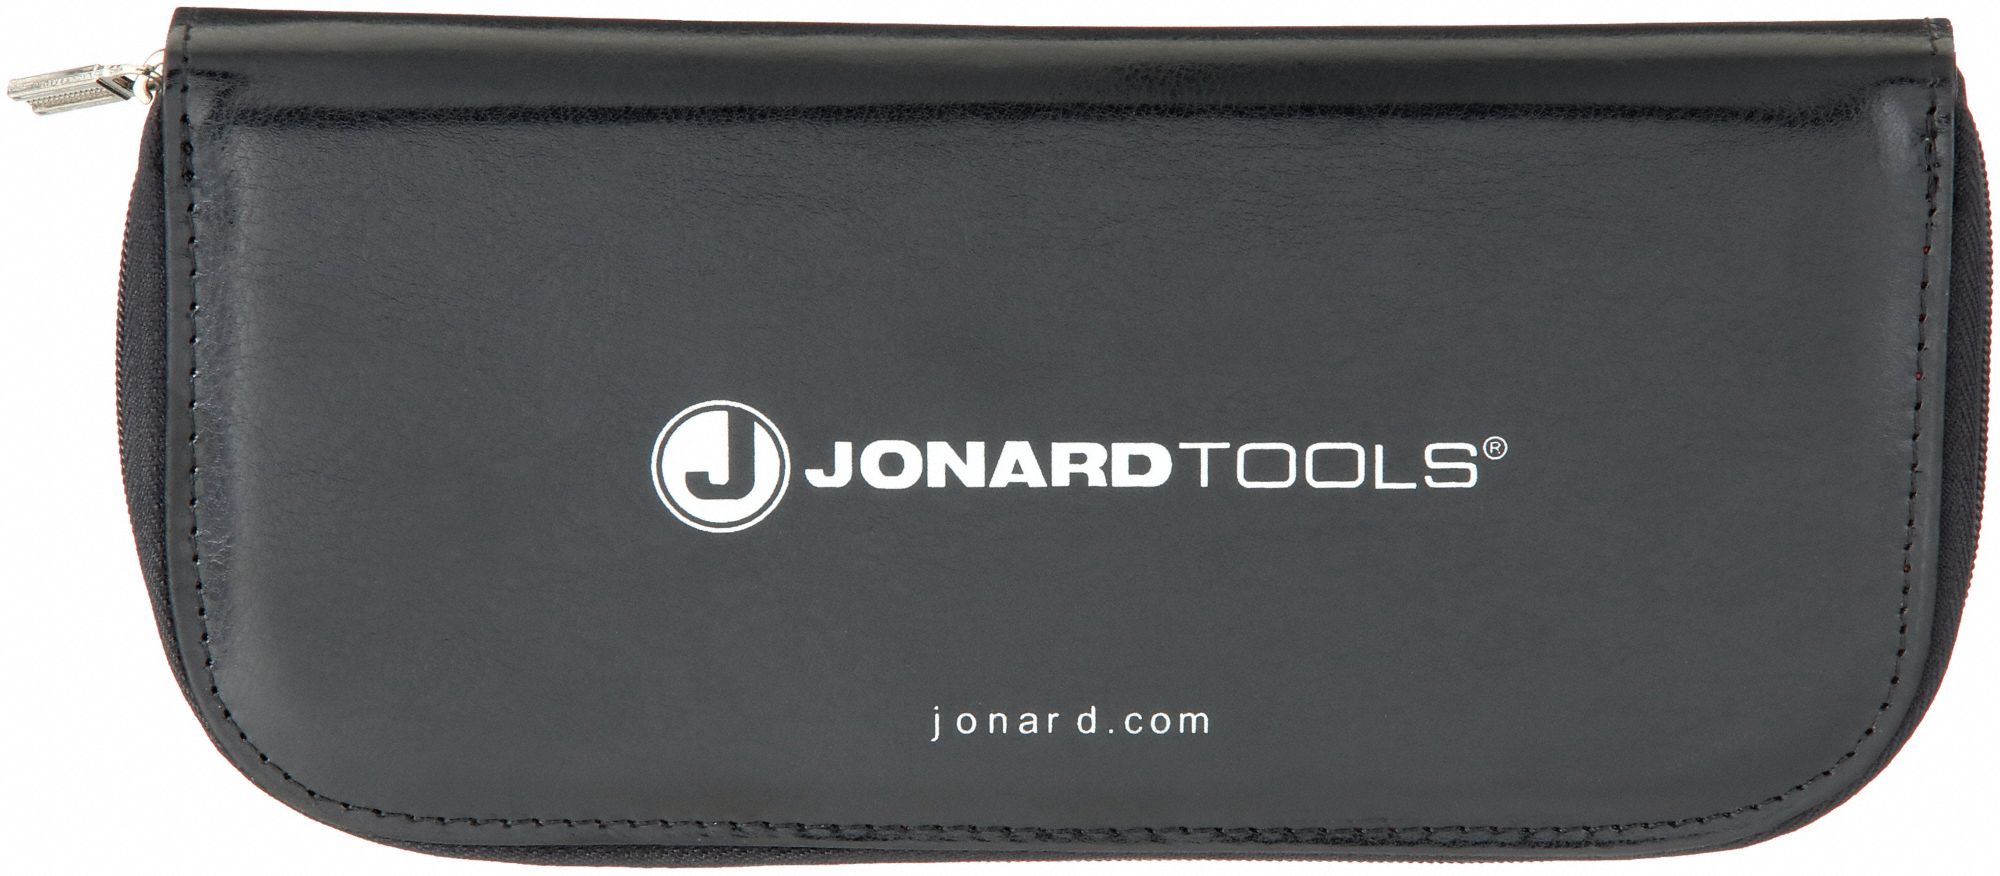 JONARD TOOLS, 6 in Tool Lg, 12_16_20 Contact Size, Pin Extraction